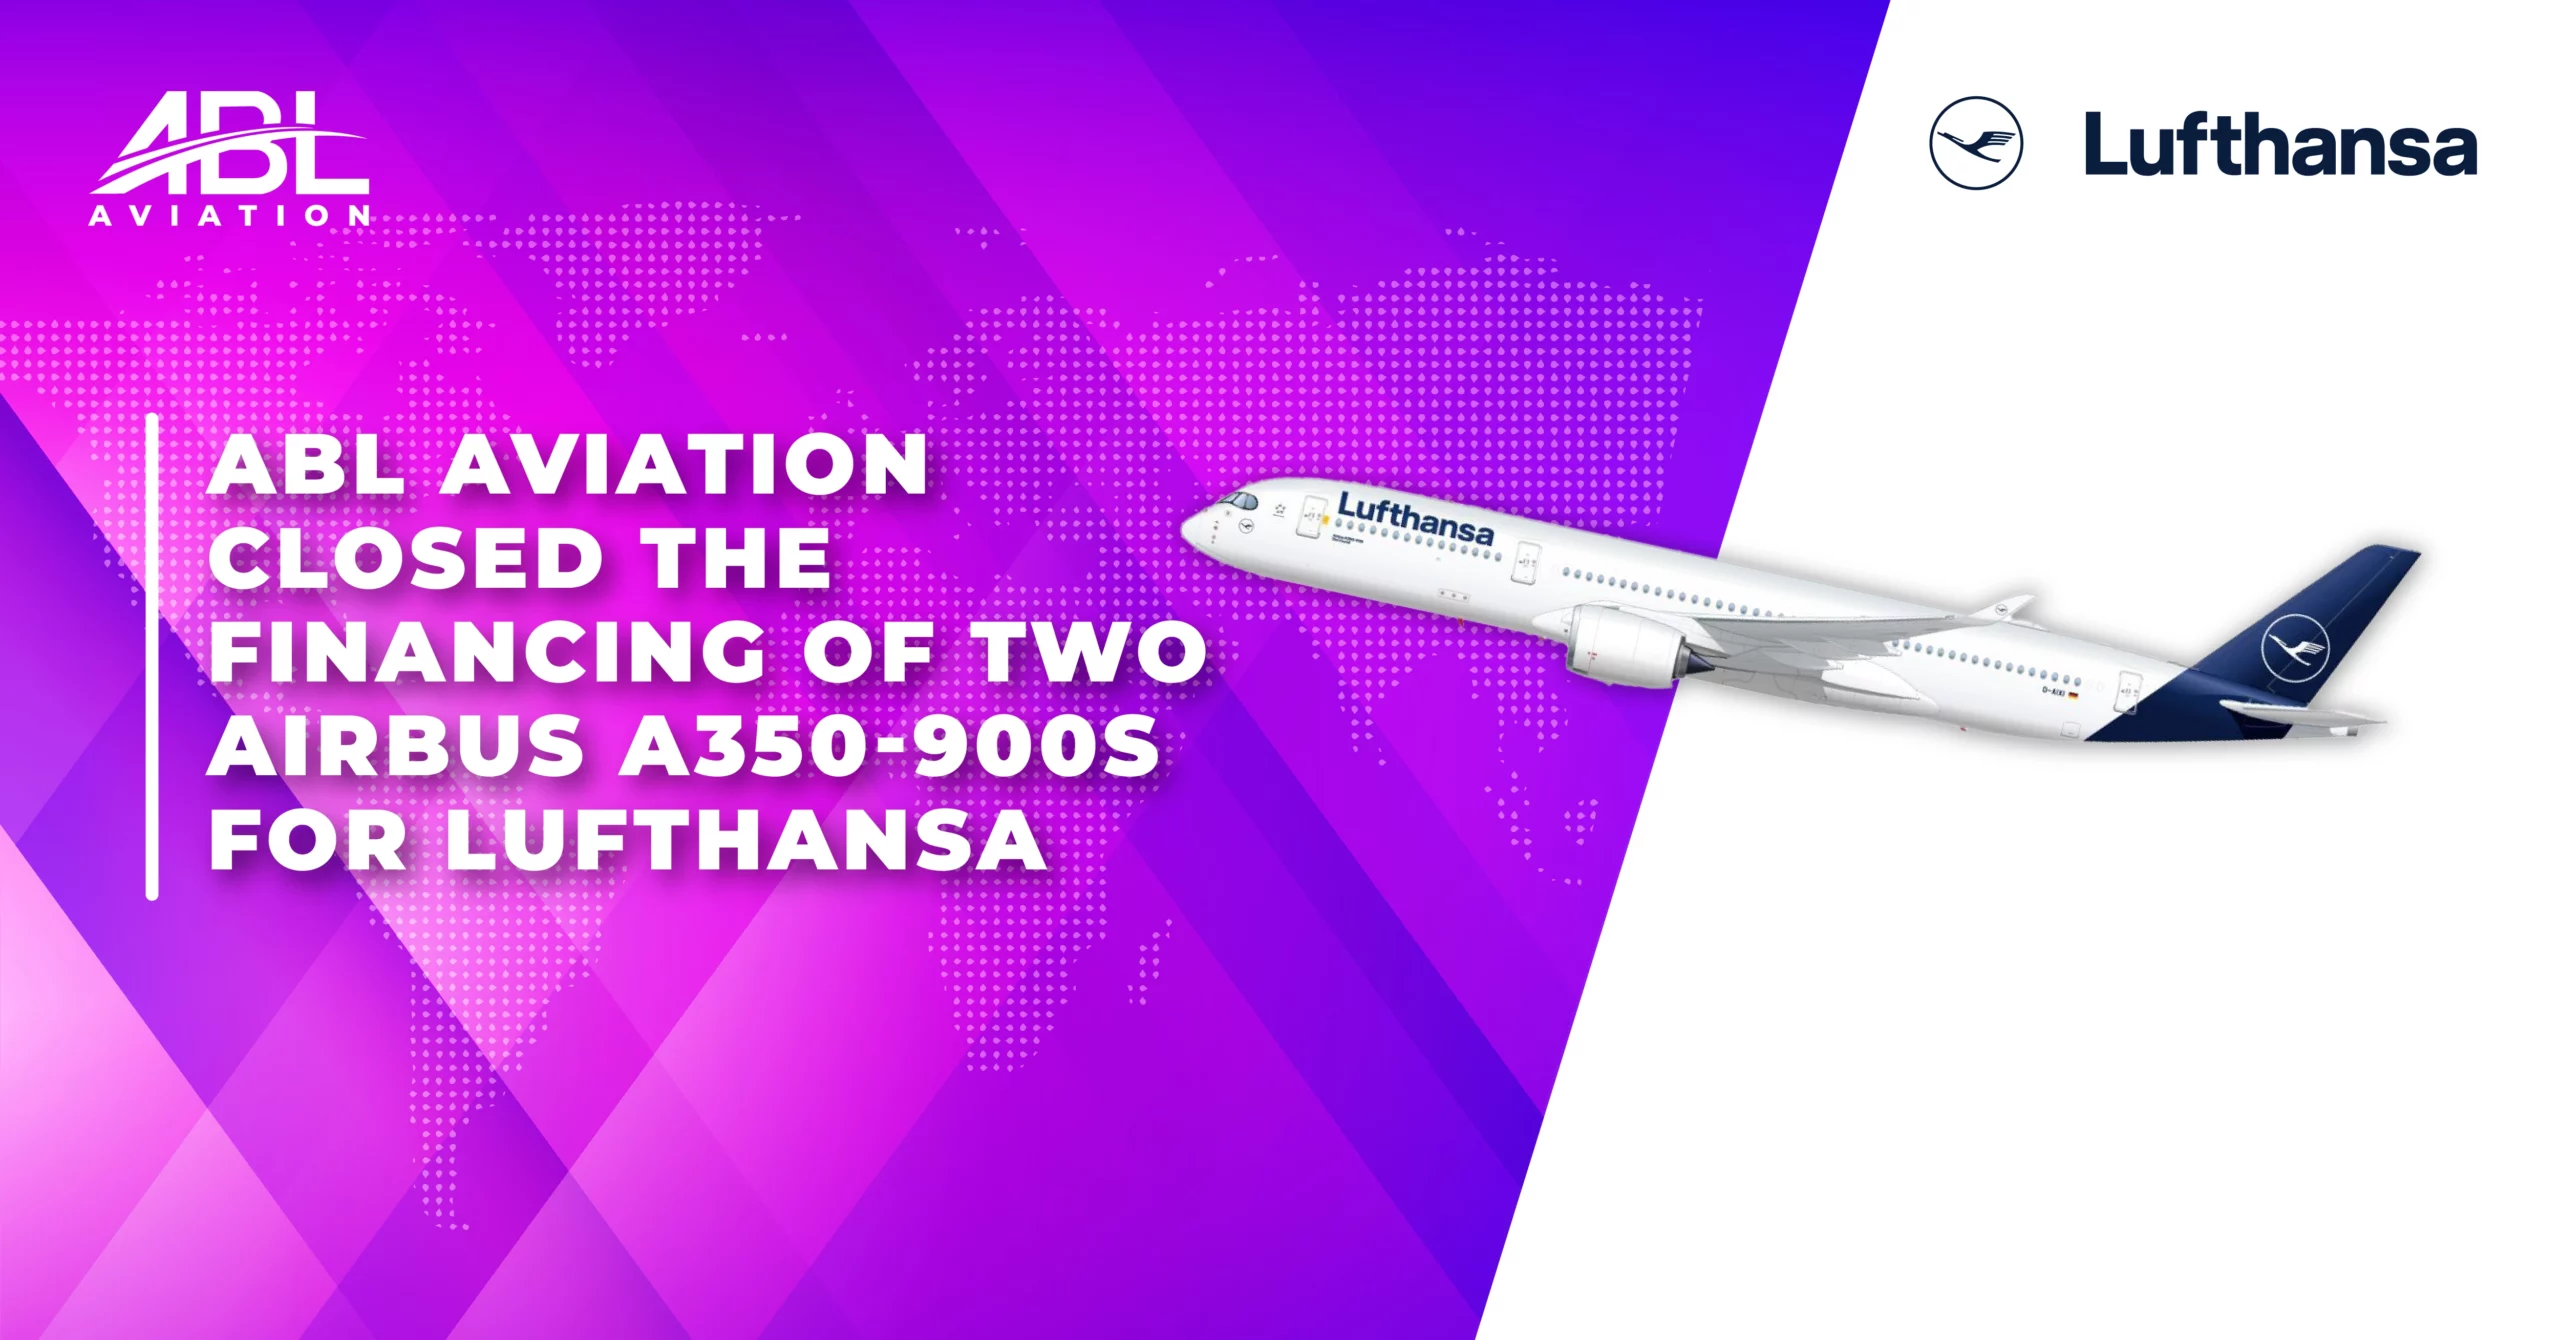 ABL Aviation Closed the Financing of Two Airbus A350-900s for Lufthansa